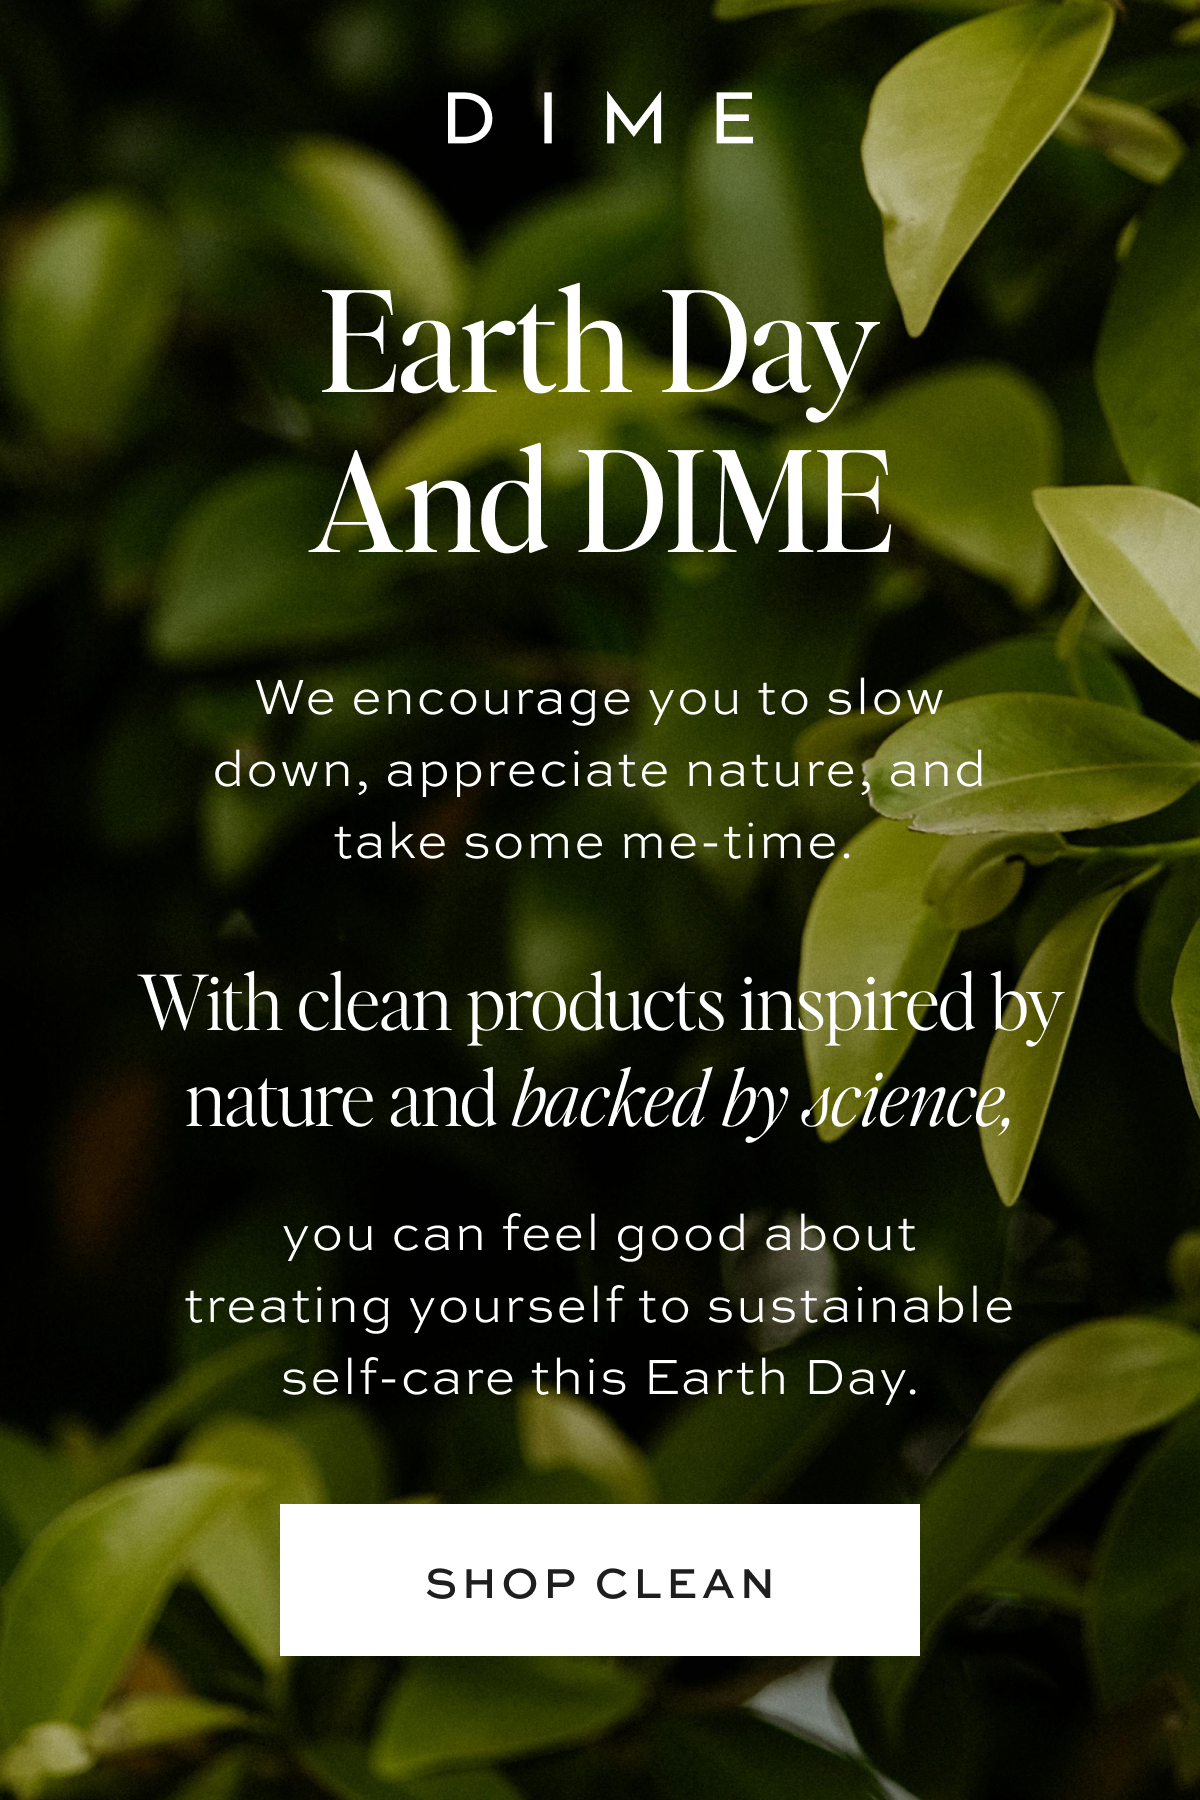 With clean products inspired by nature, and backed by science, you can feel good about treating yourself to sustainable self-care this Earth Day. [SHOP CLEAN]